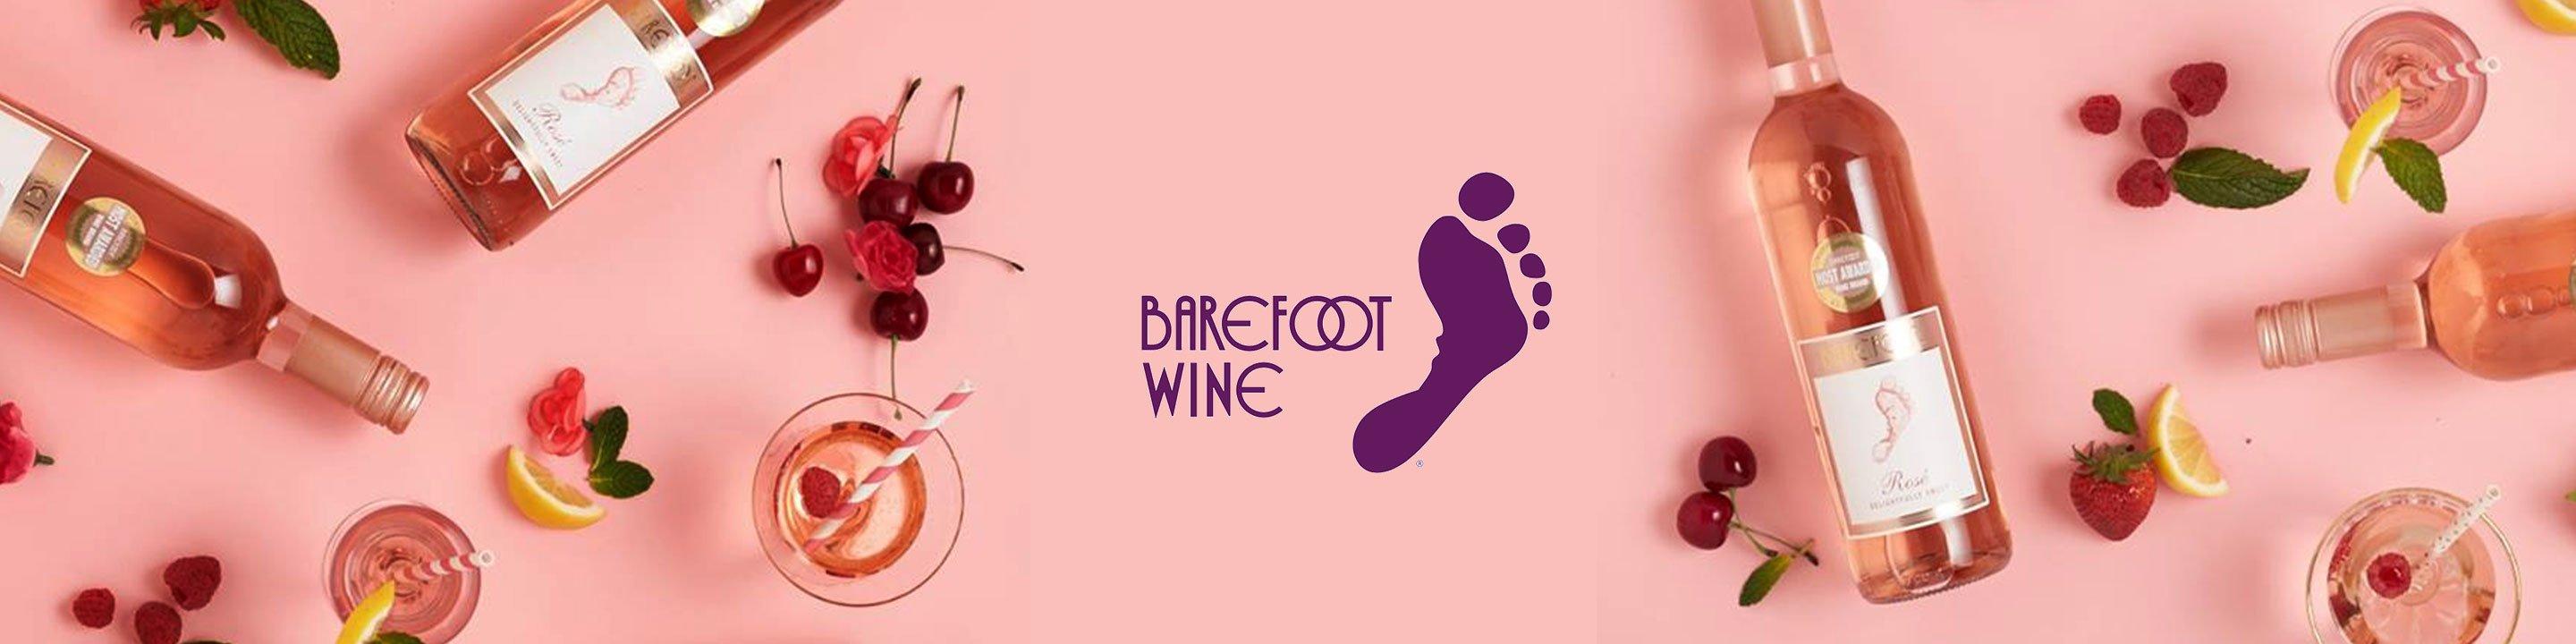 Barefoot believes in bringing people together – with wine. That’s why their mission is to introduce new friends to wines that are fun, flavorful, and approachable. As the most awarded wine brand in the world, Barefoot wines are constantly making new friends around the globe because life’s more fun when we’re together!